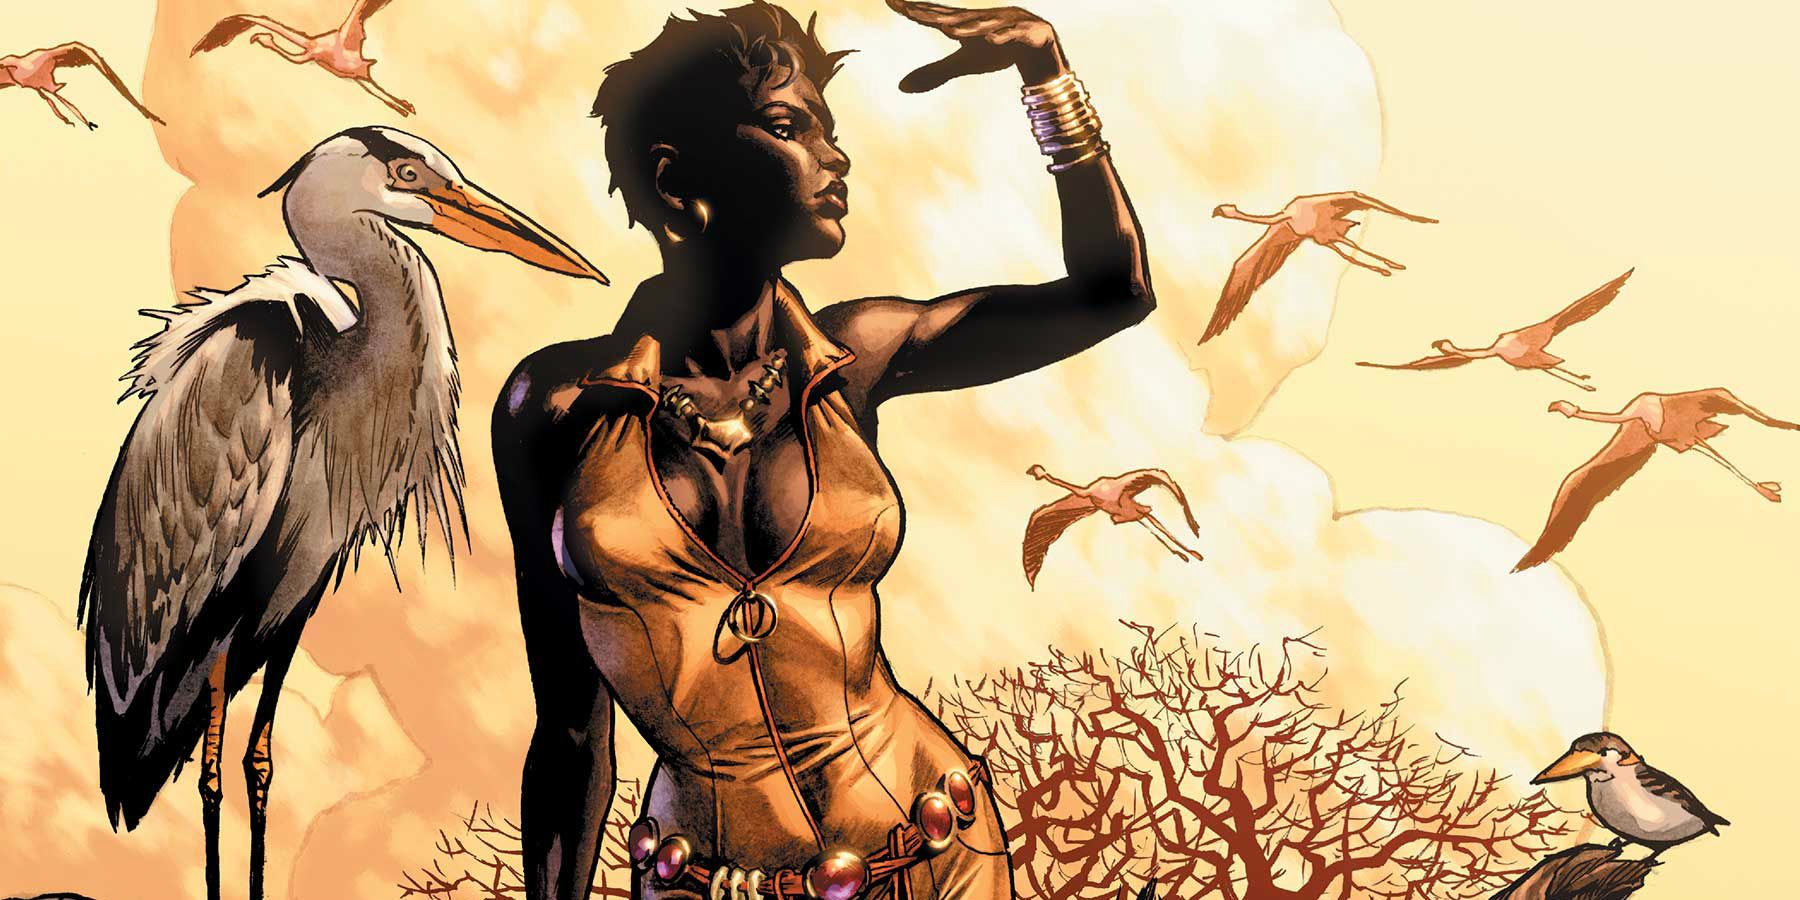 Vixen looking out into the distance in the DC Comics